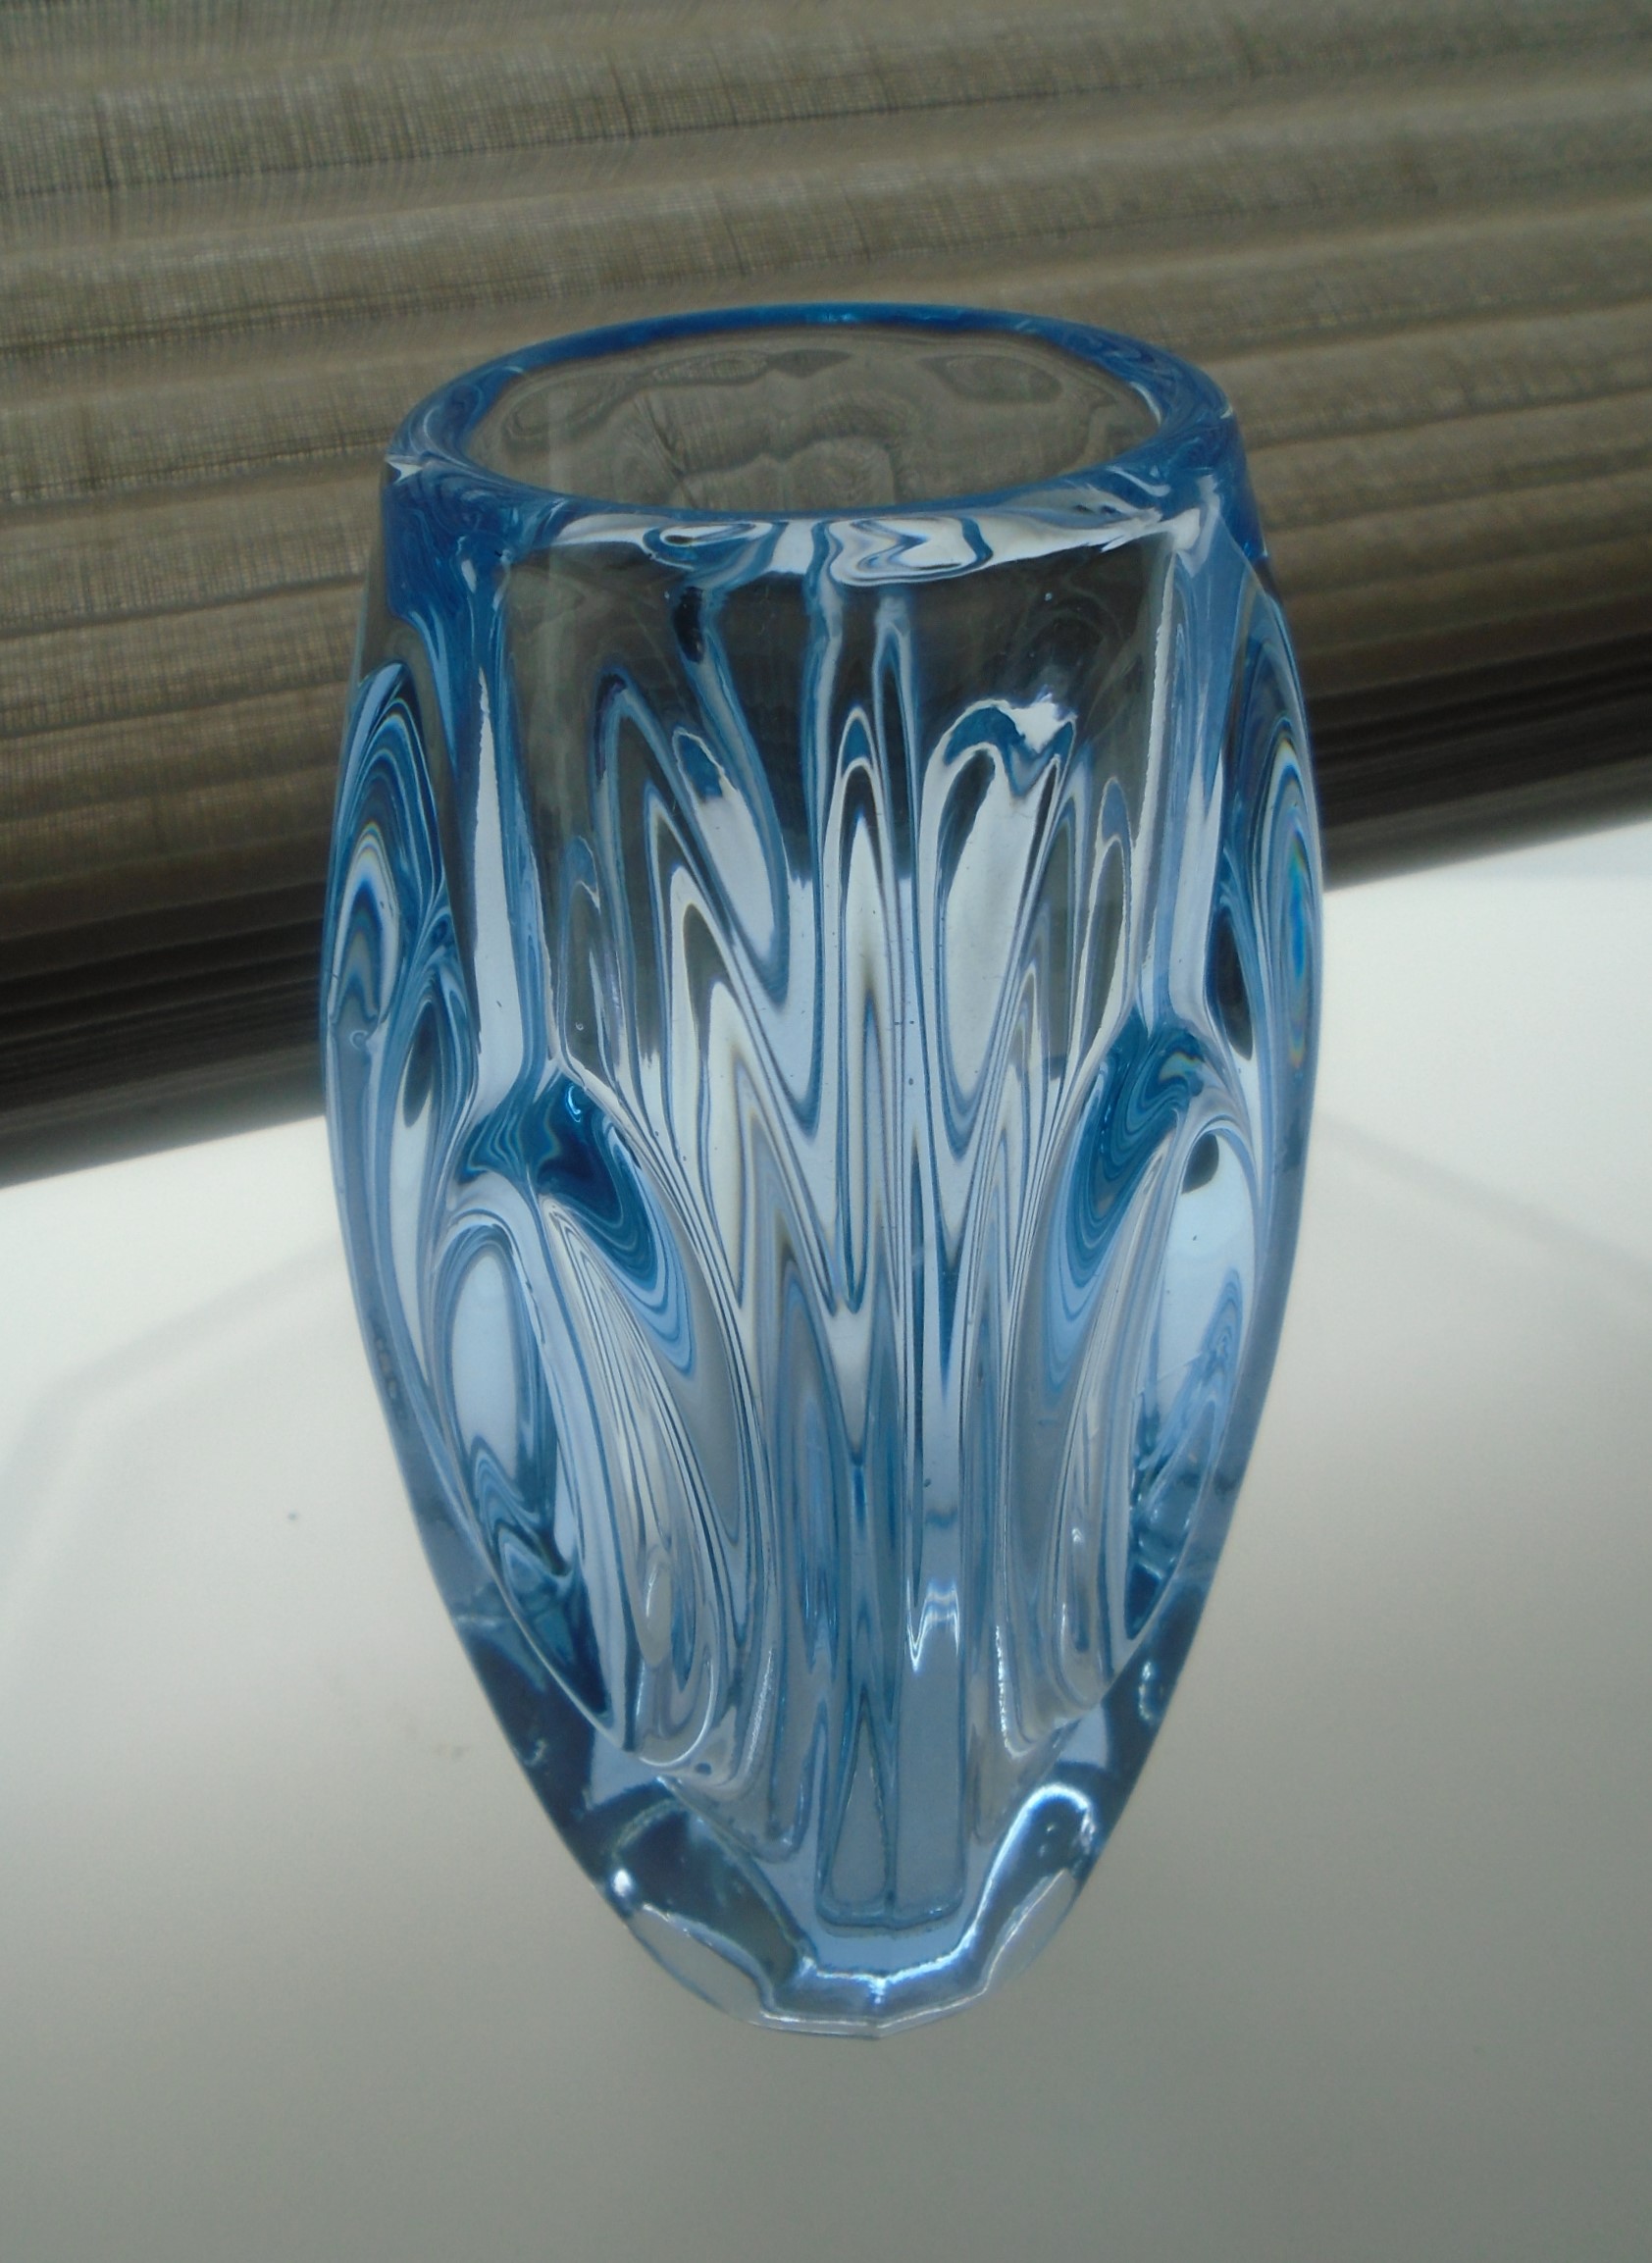 Offered for sale is a MID CENTURY SKLO UNION ROSICE GLASS 6"high  LIGHT BLUE LENS VASE  designed by R. SCHROTTER. 